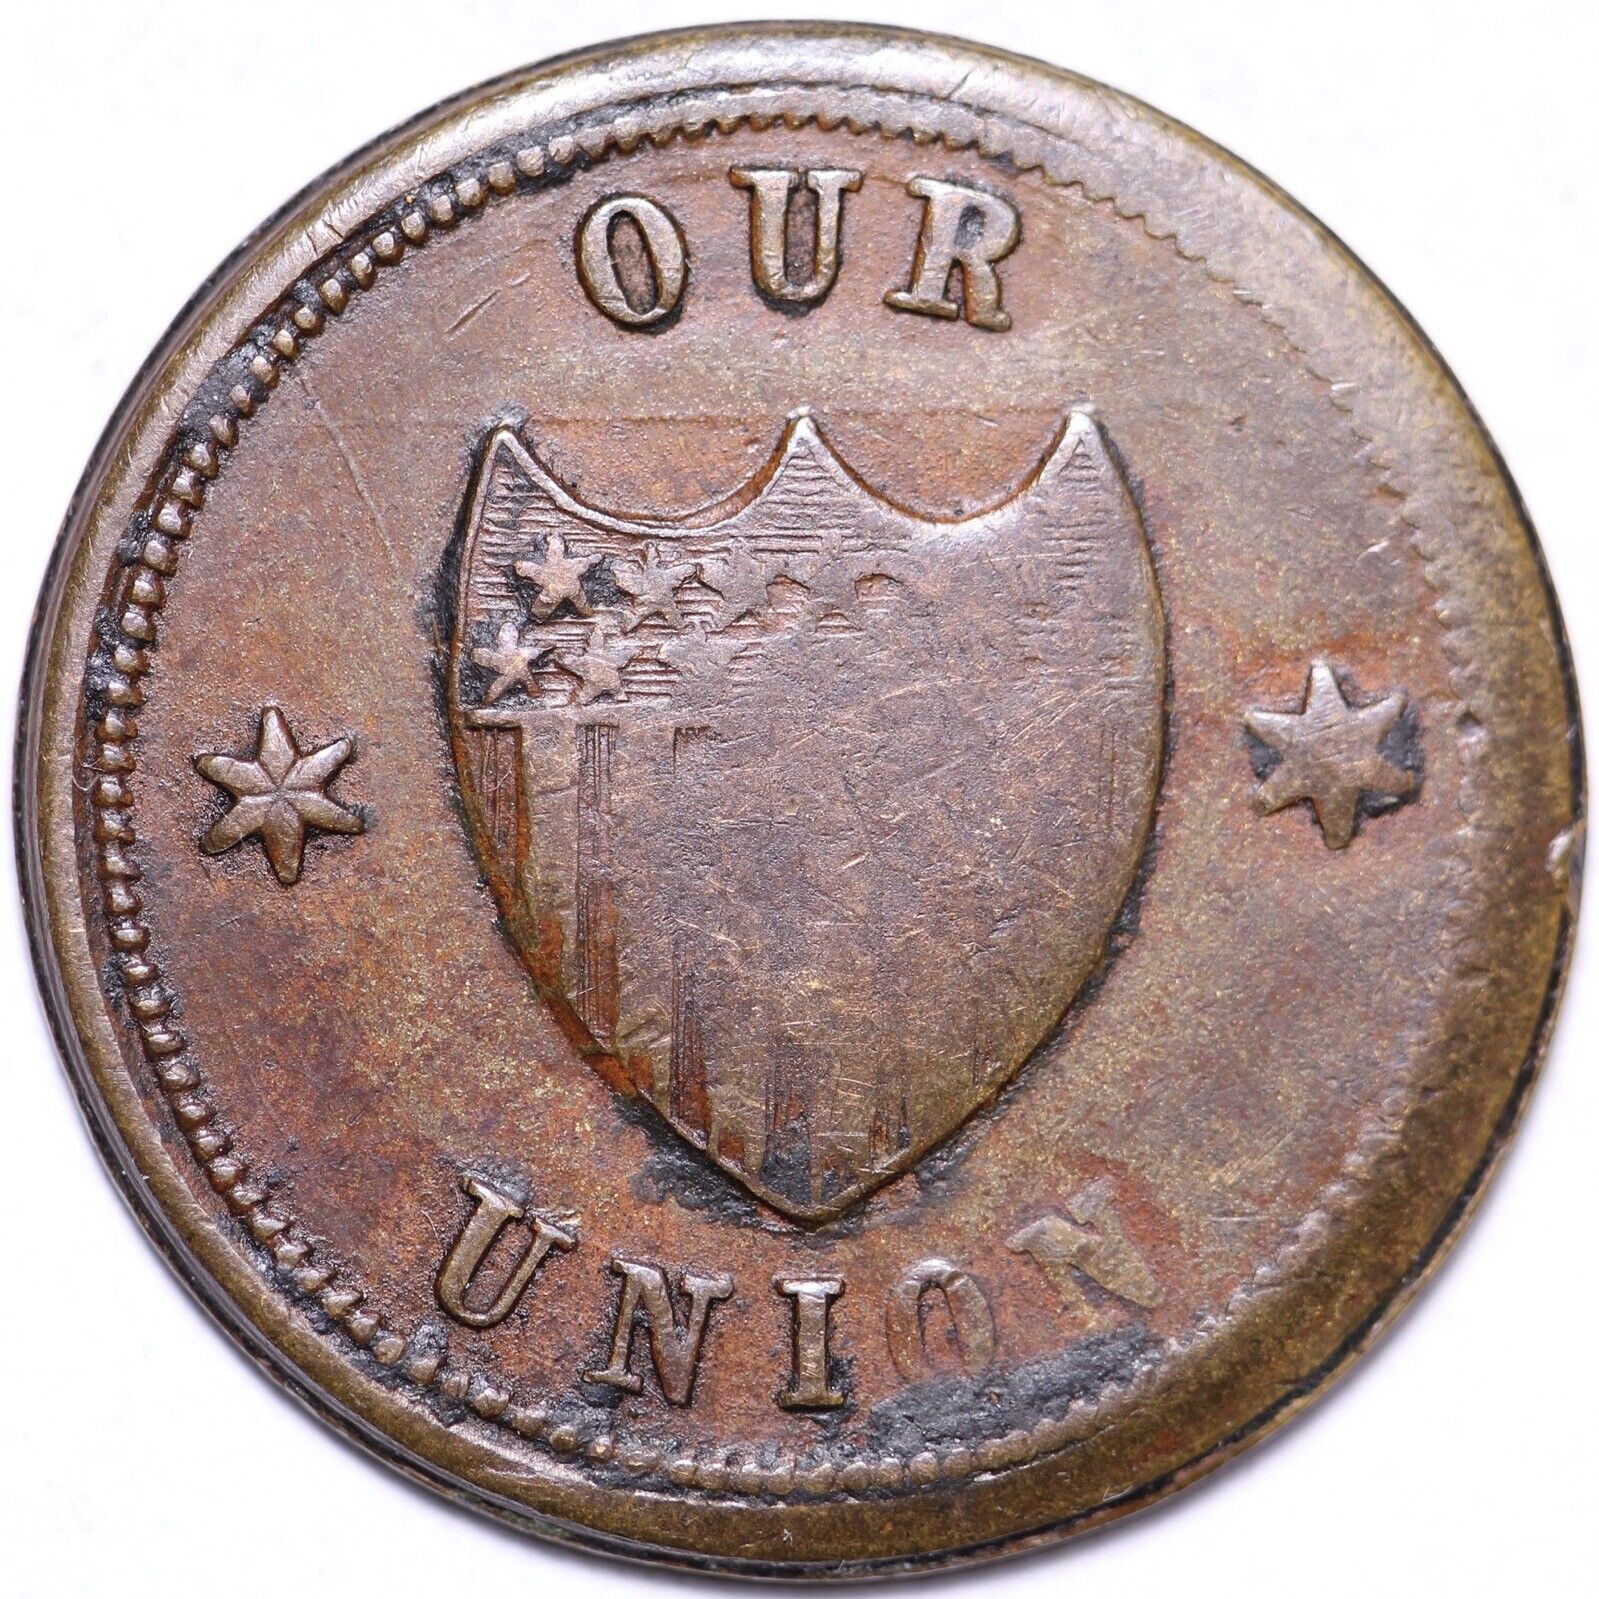 Civil War Token Our Union Crossed ACM High order Ultra-Cheap Deals Cannons FREE E615 SHIPPING